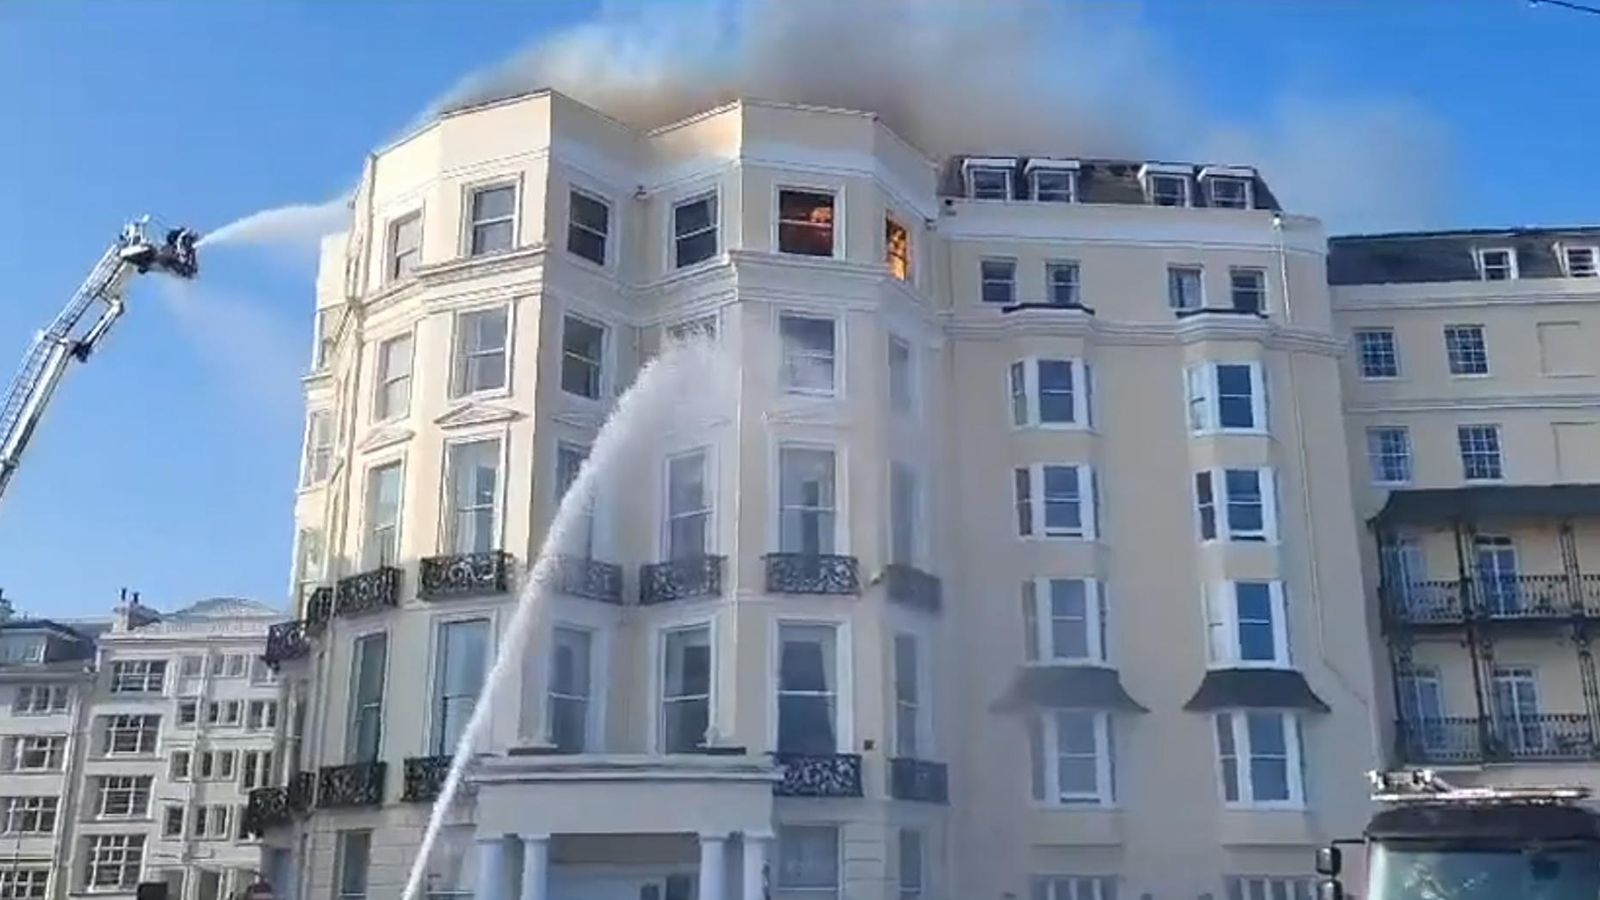 Firefighters tackle blaze at prominent 200-year-old hotel on Brighton seafront